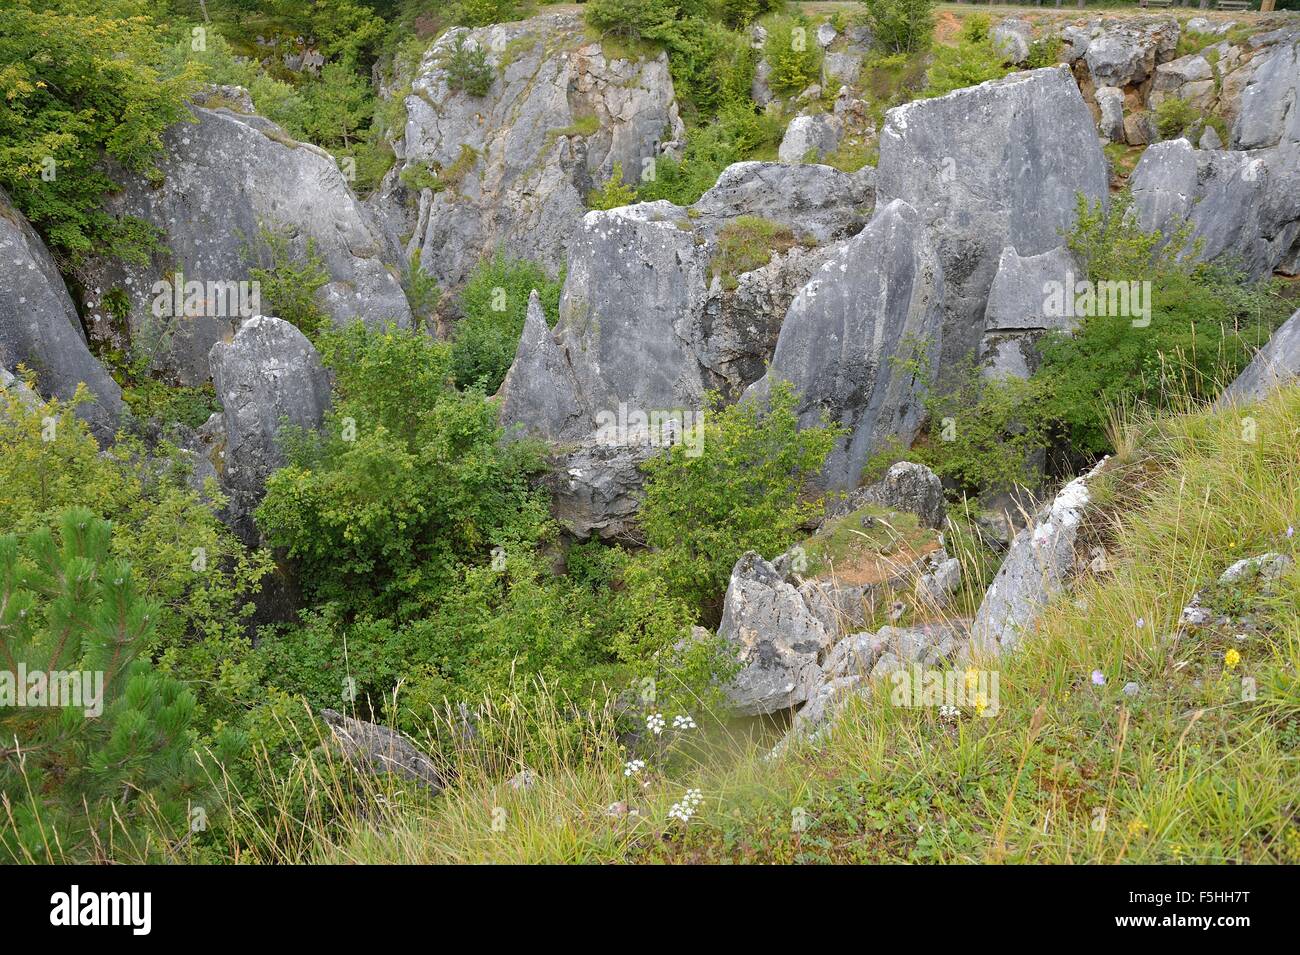 The Fondry des chiens (Pits of the dogs) strange geologic site with close connections to karst development. Stock Photo